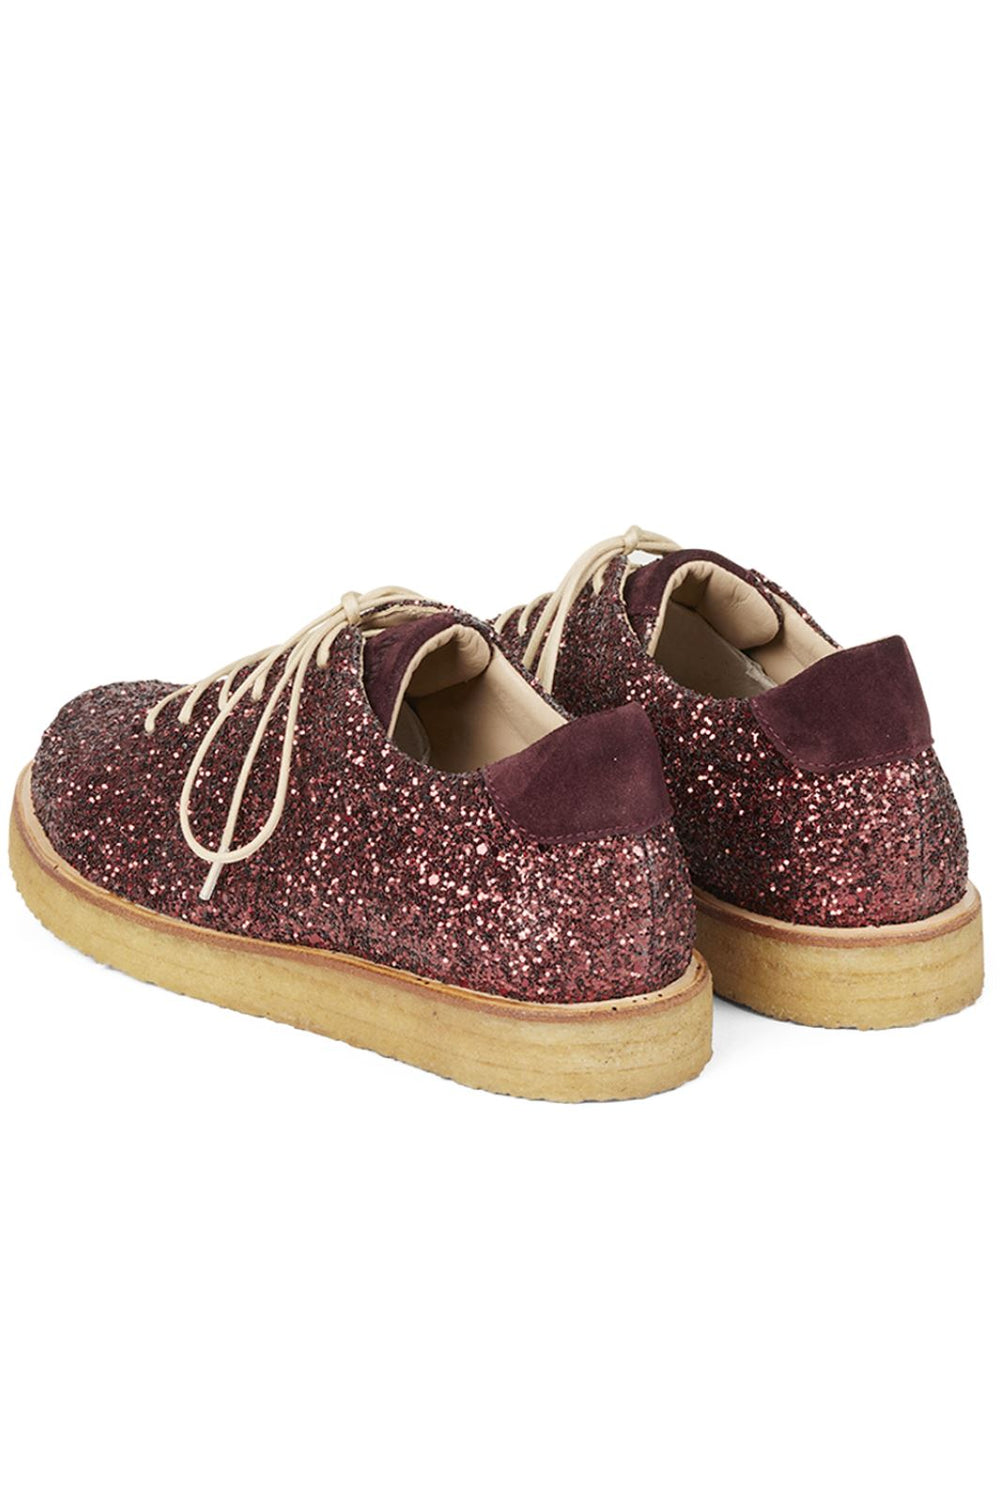 Angulus - Shoes - flat - with lace - 1710/2195 Bordeaux Glitter Sneakers 